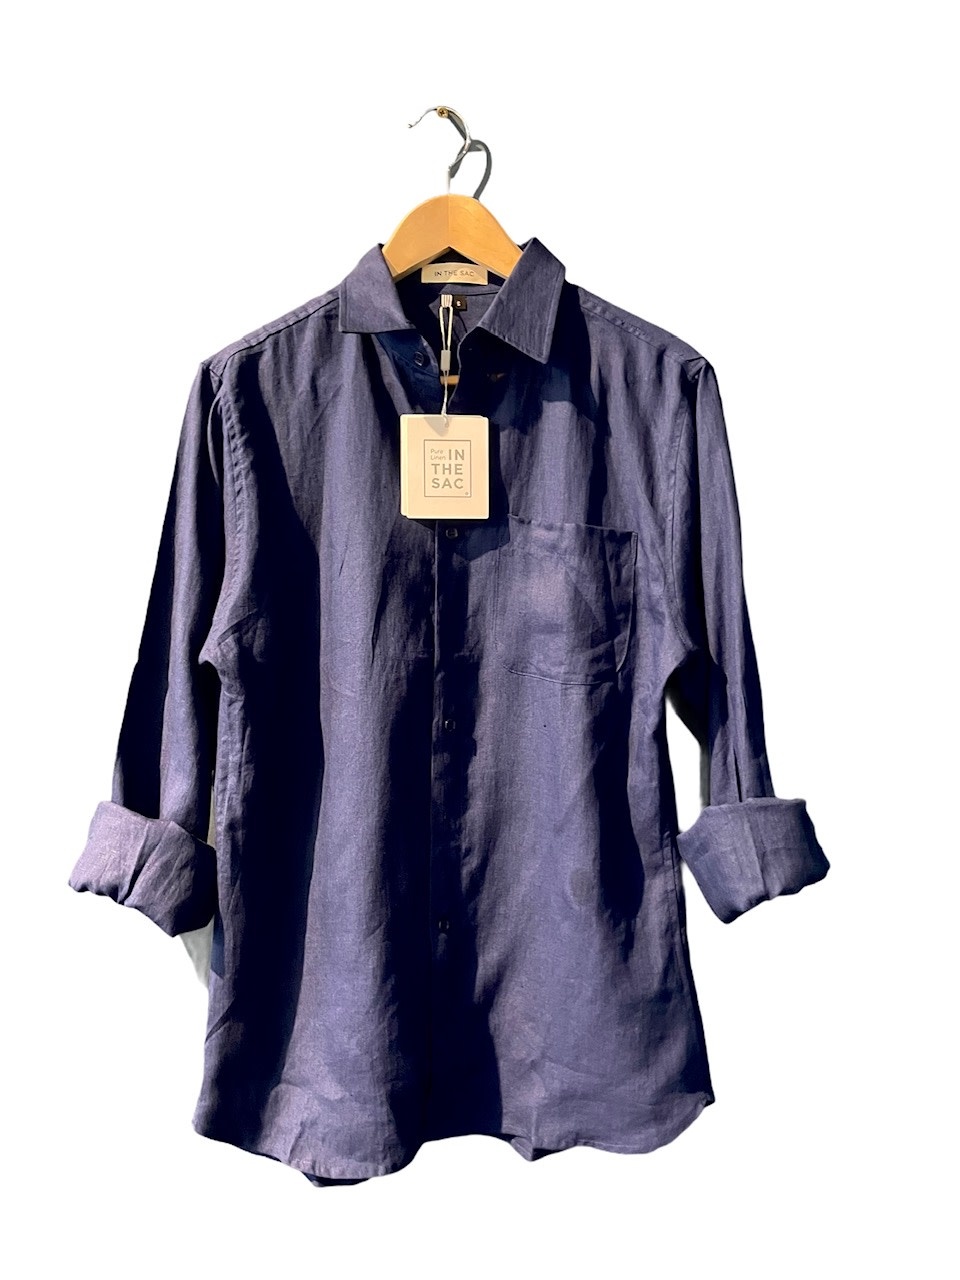 The Linen Shirt - Long Sleeve Slim Fit - Made in Australia with 100% Irish Linen-6